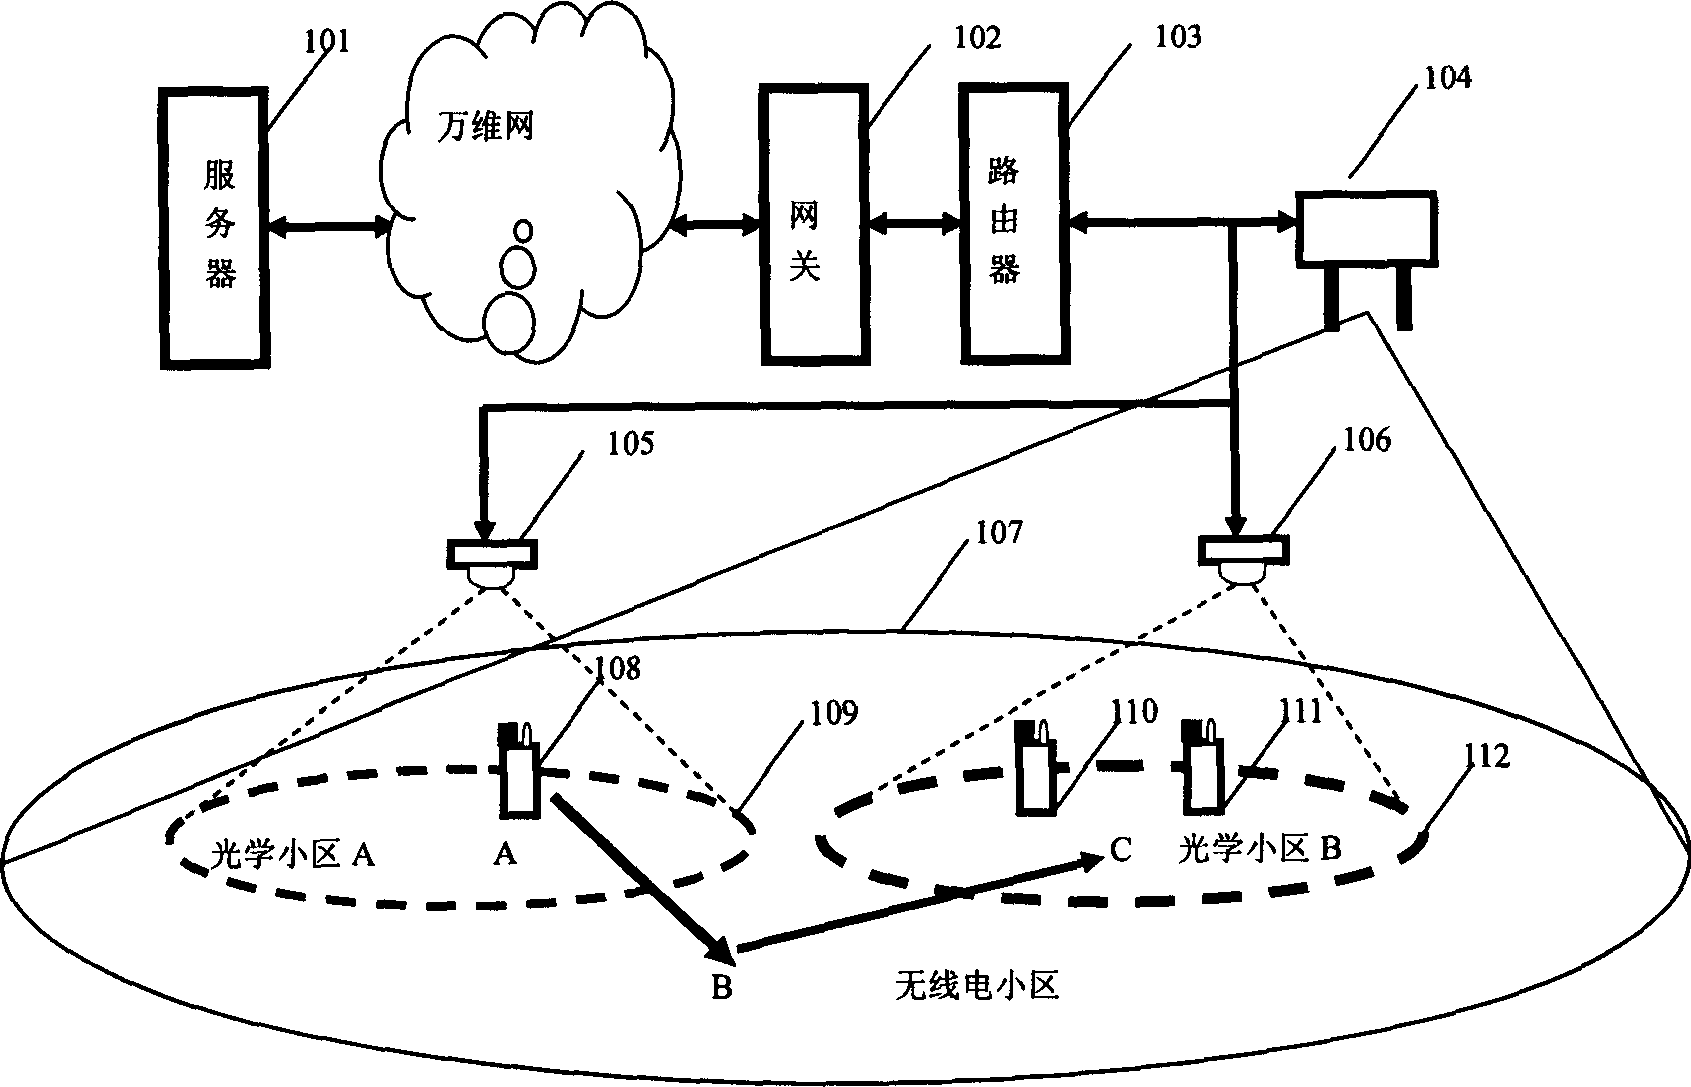 Switching method between optical channel and radio channel